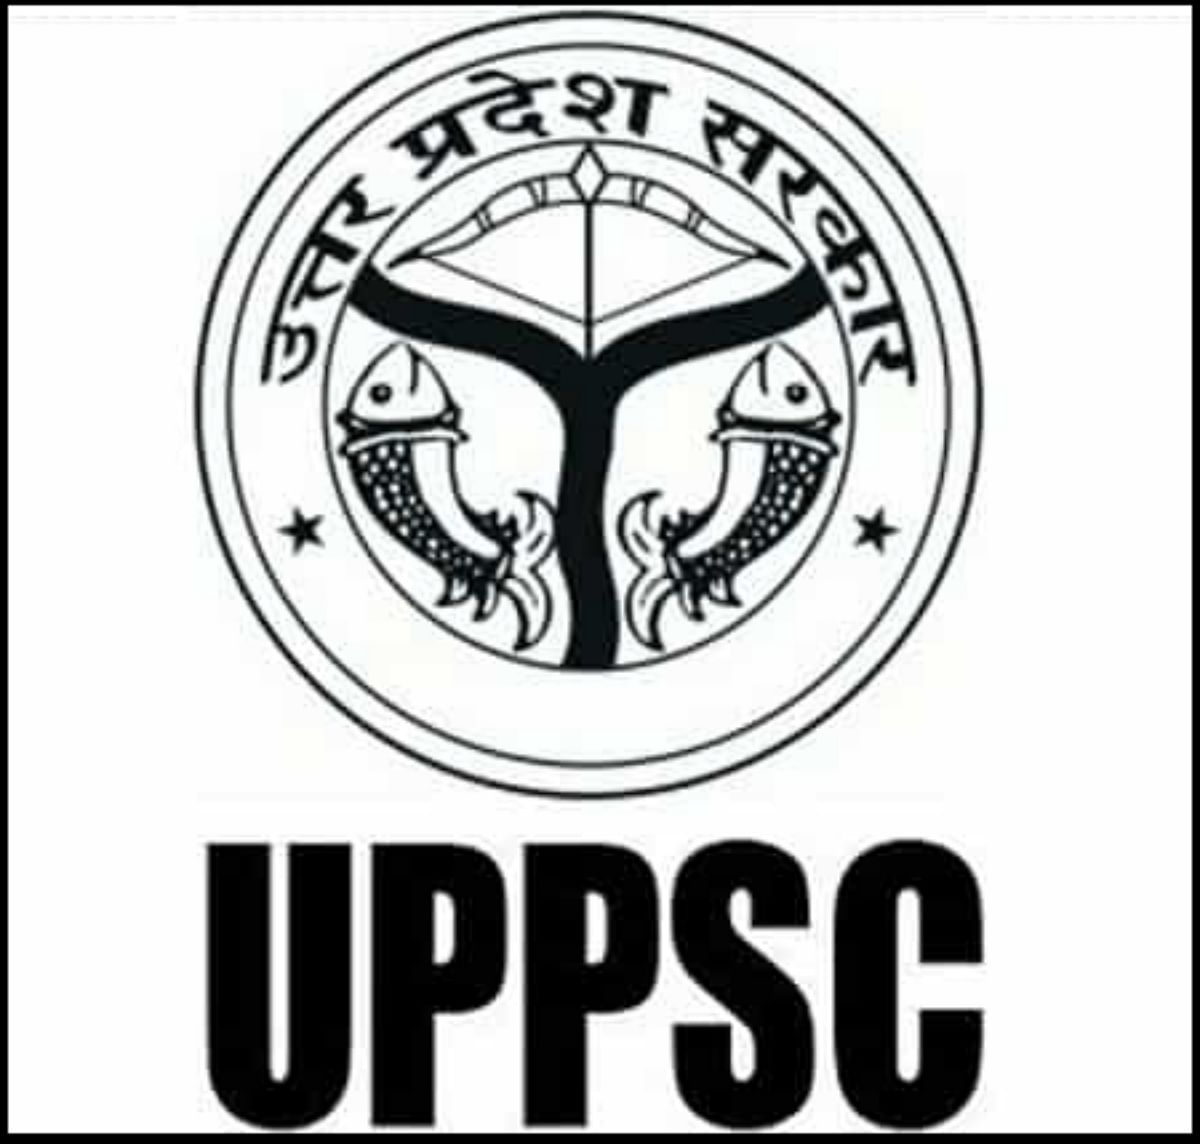 UPPSC Releases Notification For Recruitment of APS, Know All Details Here